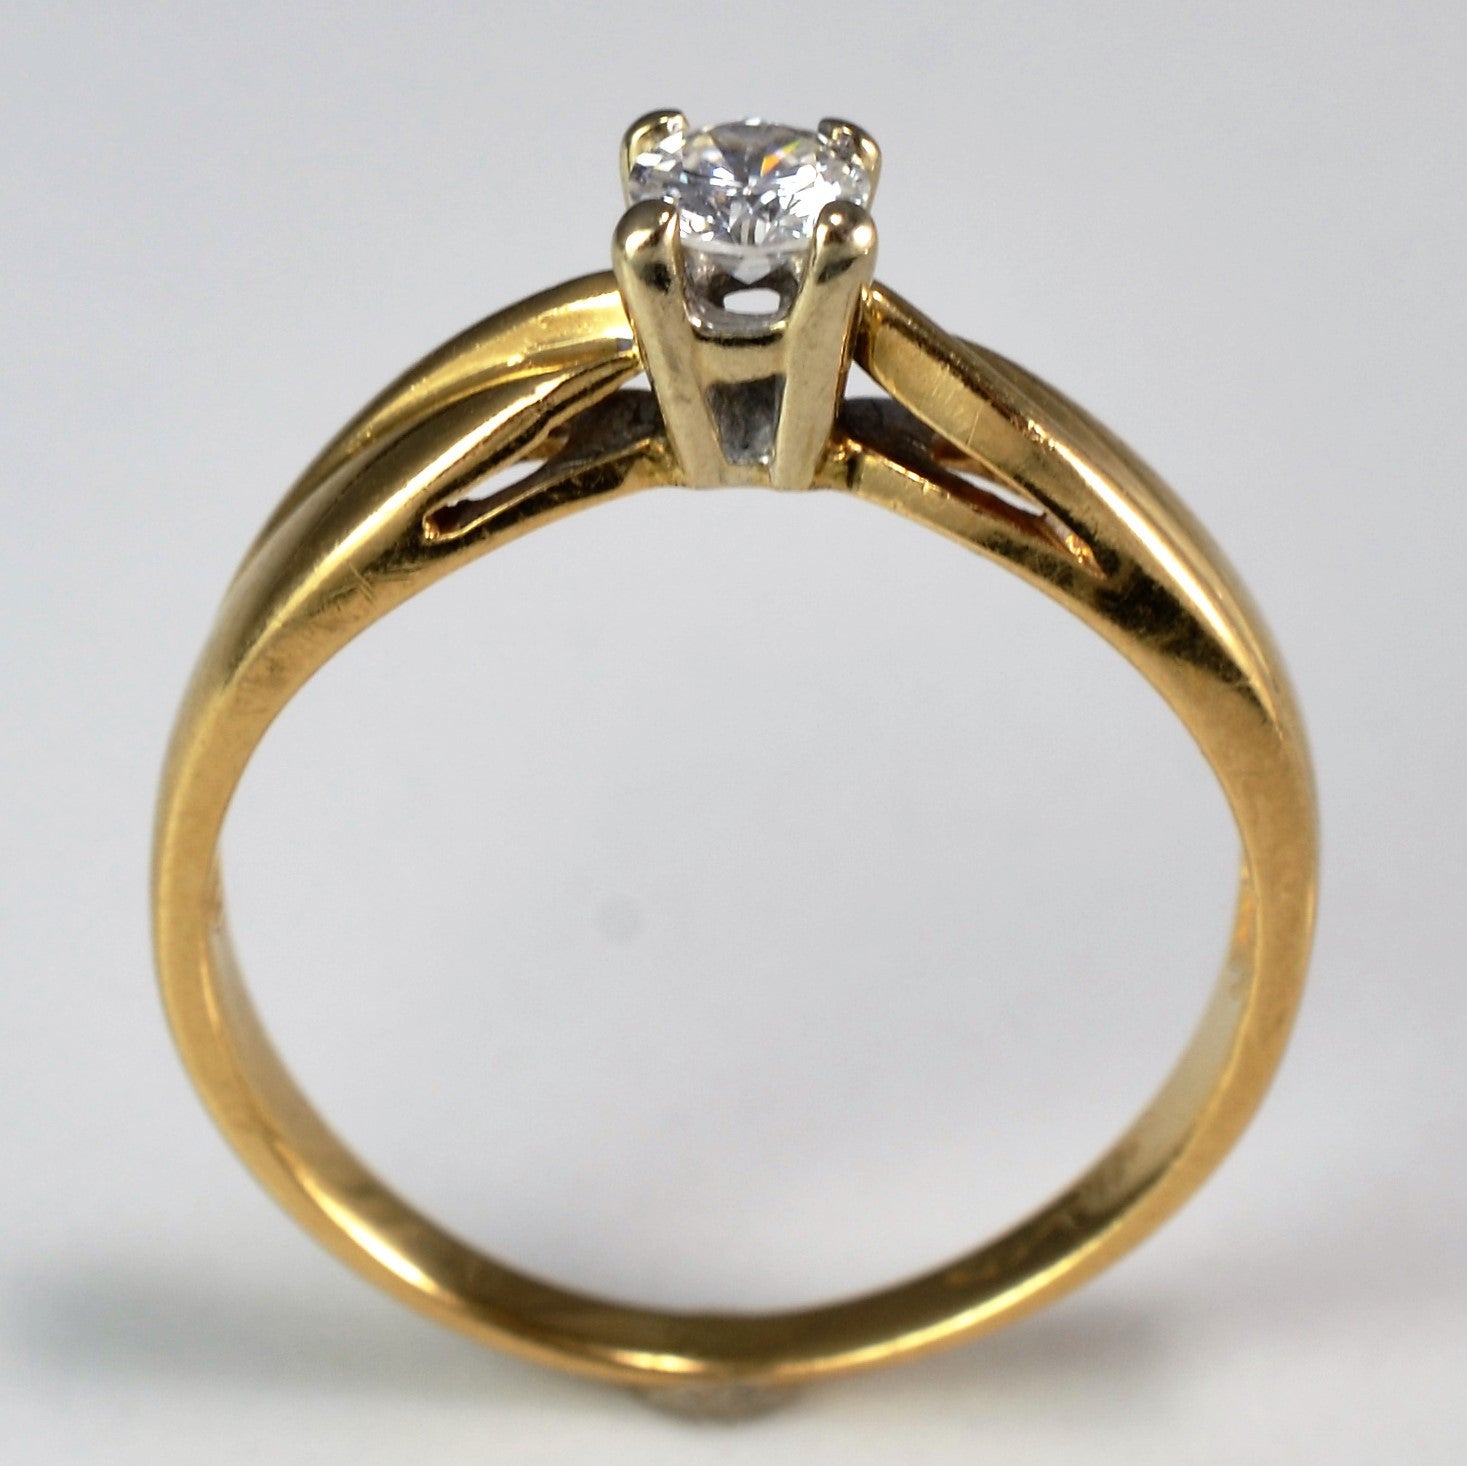 Twisted Tapered Solitaire Engagement Ring | 0.17 ct, SZ 5.5 |